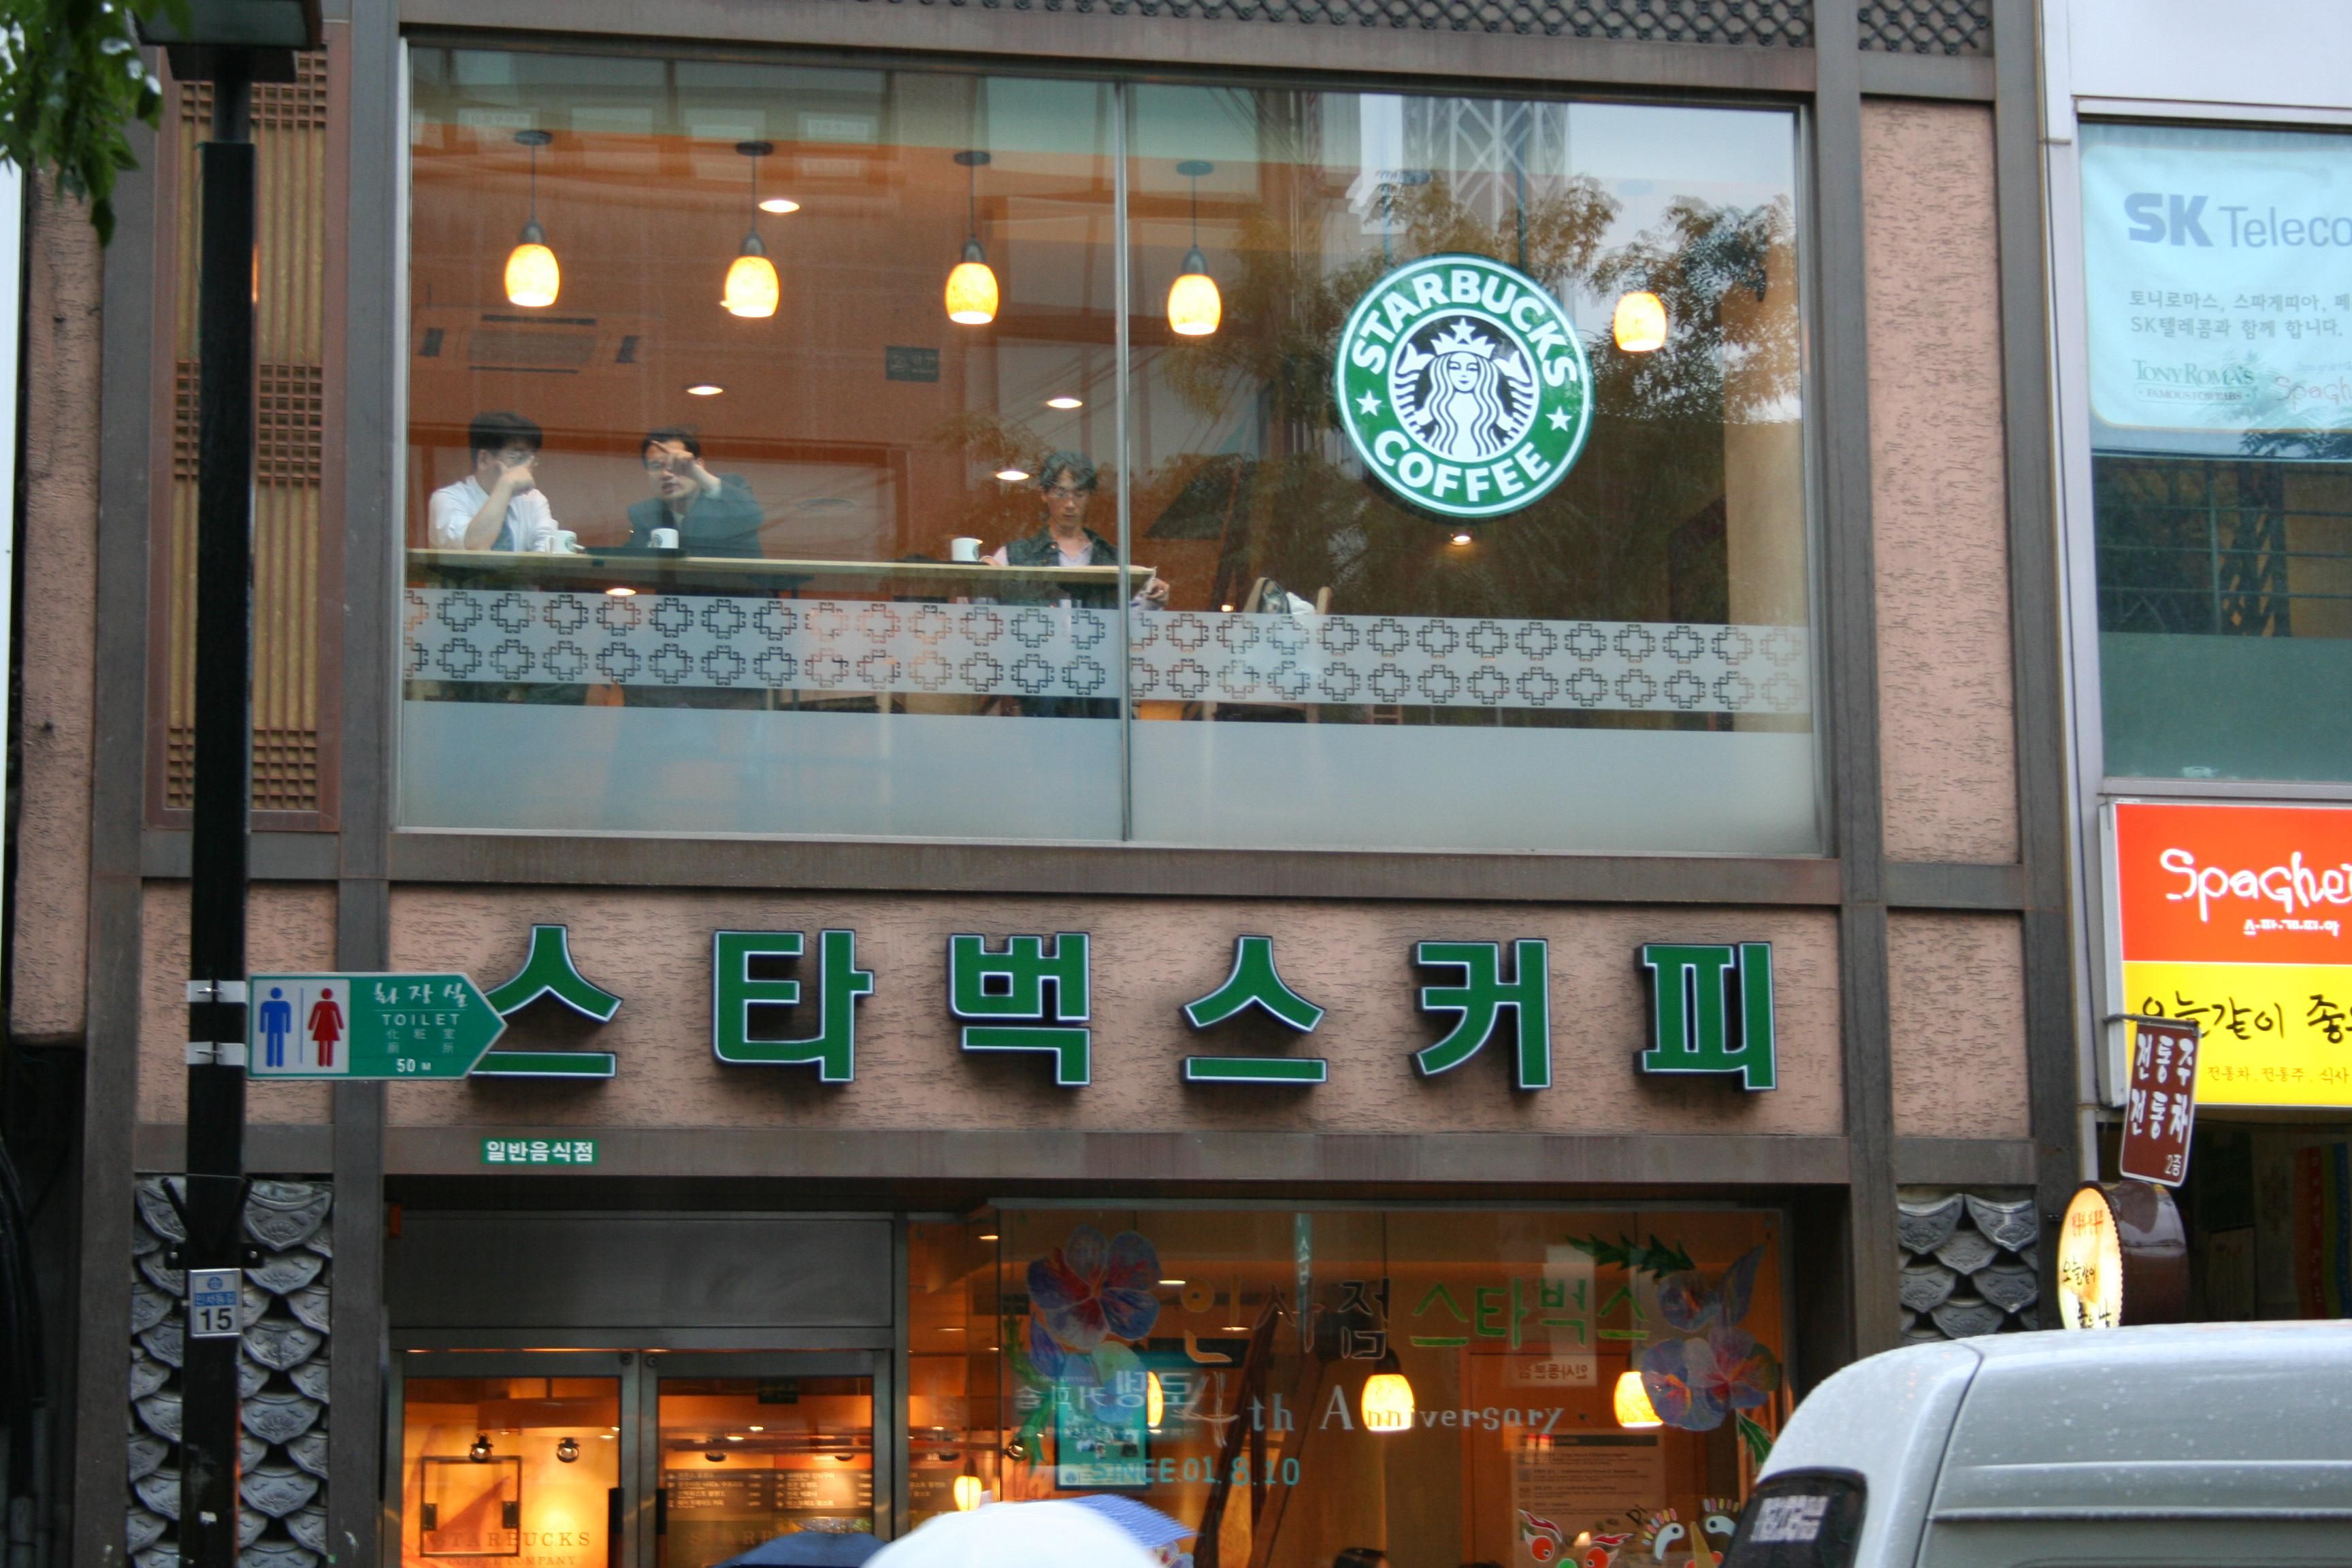 Starbucks business in Russia is sold to pro-war entrepreneurs